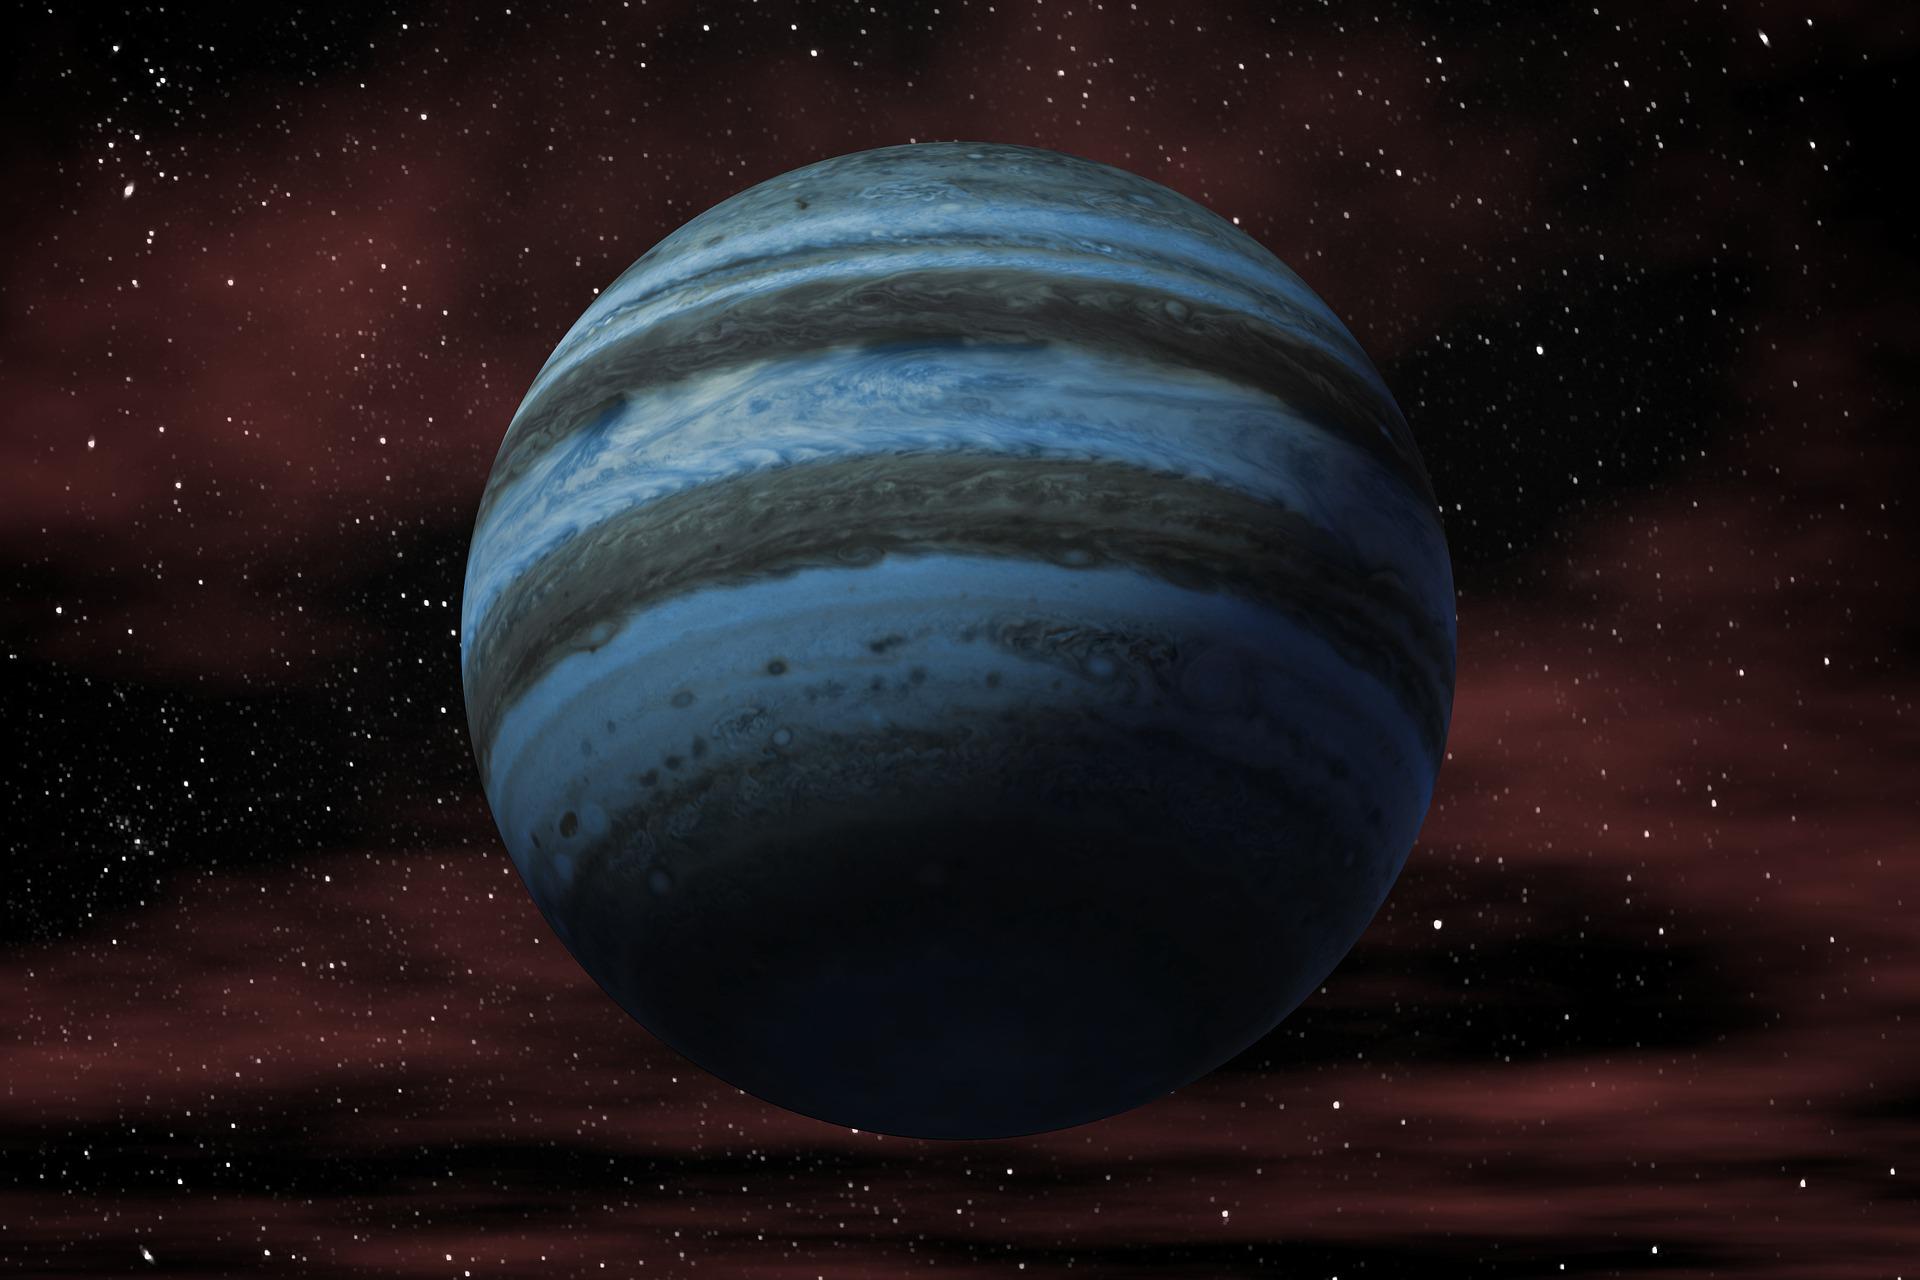 The first exoplanets discovered were gas giants.  Its size facilitated observations (Source: Pixabay/Elchinator)